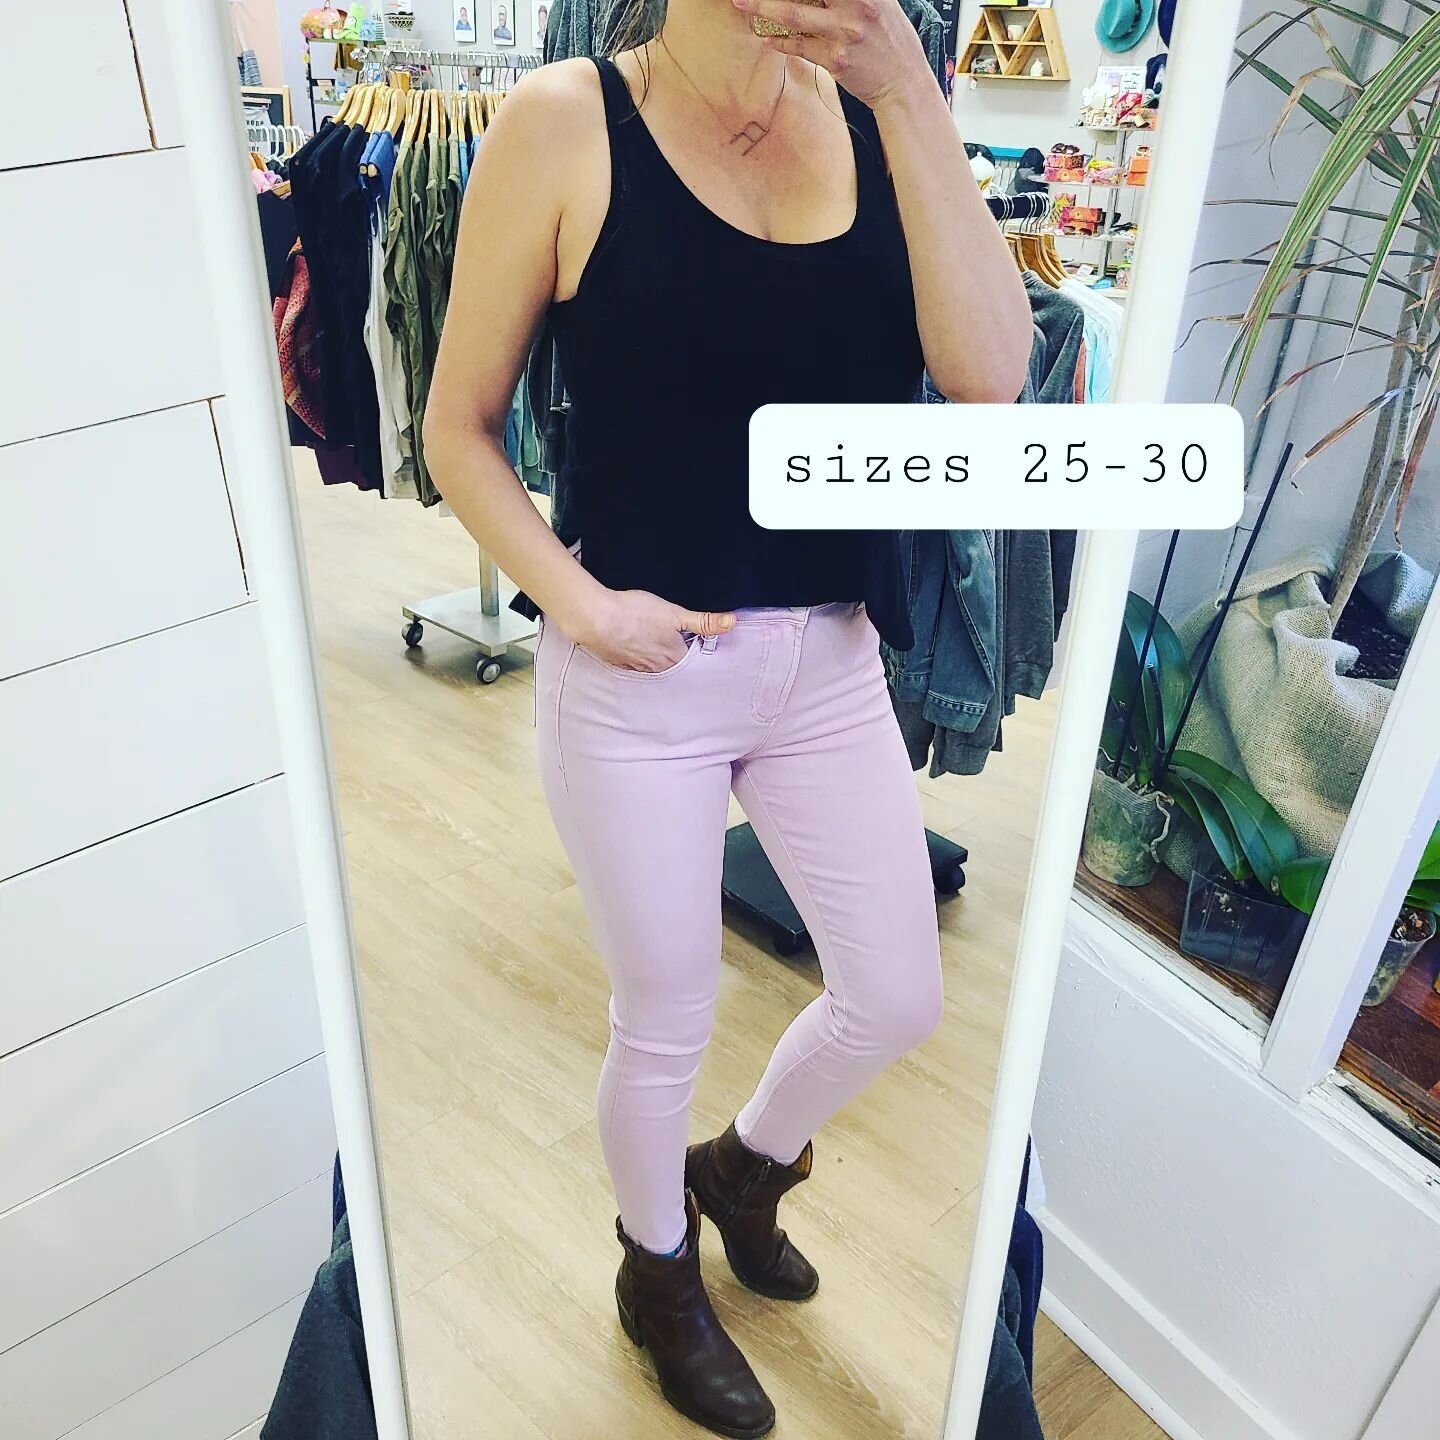 We got some neeewwww @dearjohndenim jeans in the house! And shorts!! Yeeehoo! 
.
Check out the fun new pink jeans, and the most comfy shorts! Oh my! I listed sizes available for each style/color. We keep the stock smaller, so come in and nab your siz